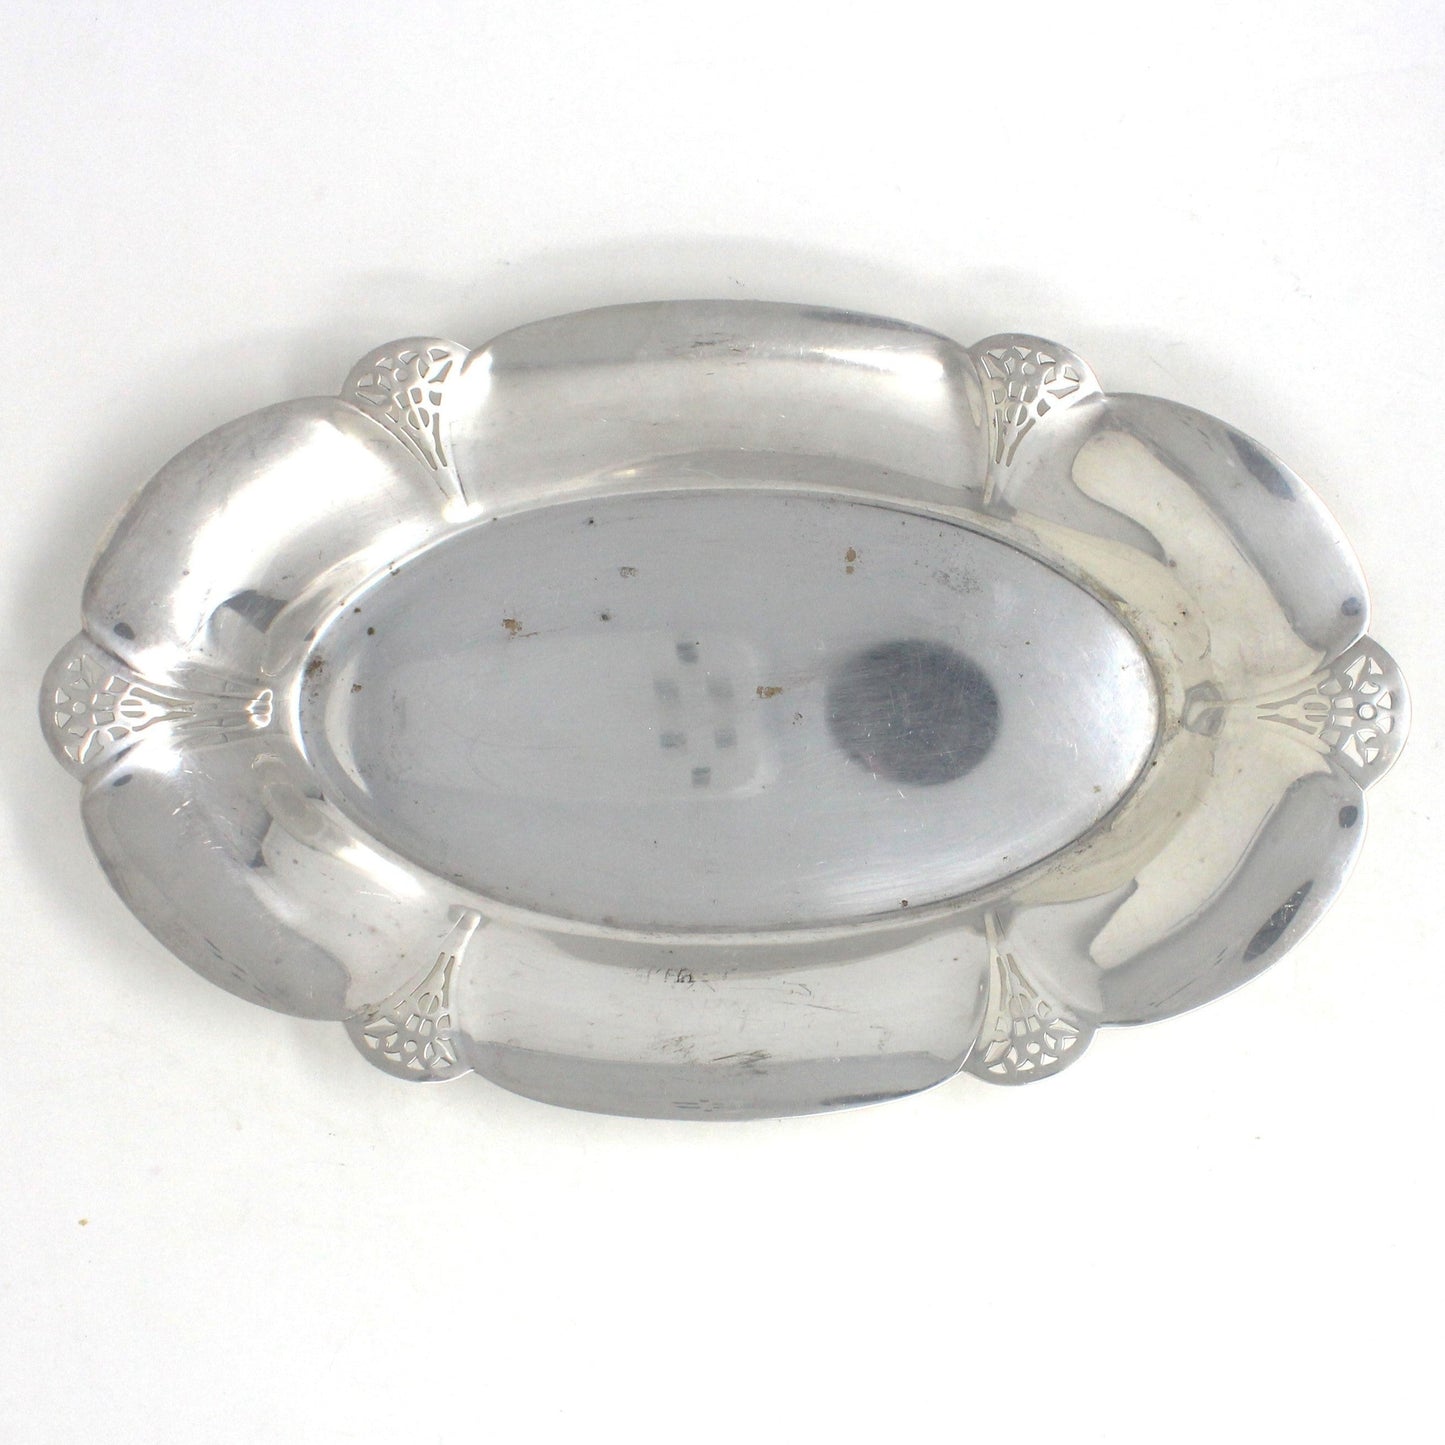 Tray, Wm Rogers, Bread Tray, Reticulated Oval Tray, Silverplate, Antique